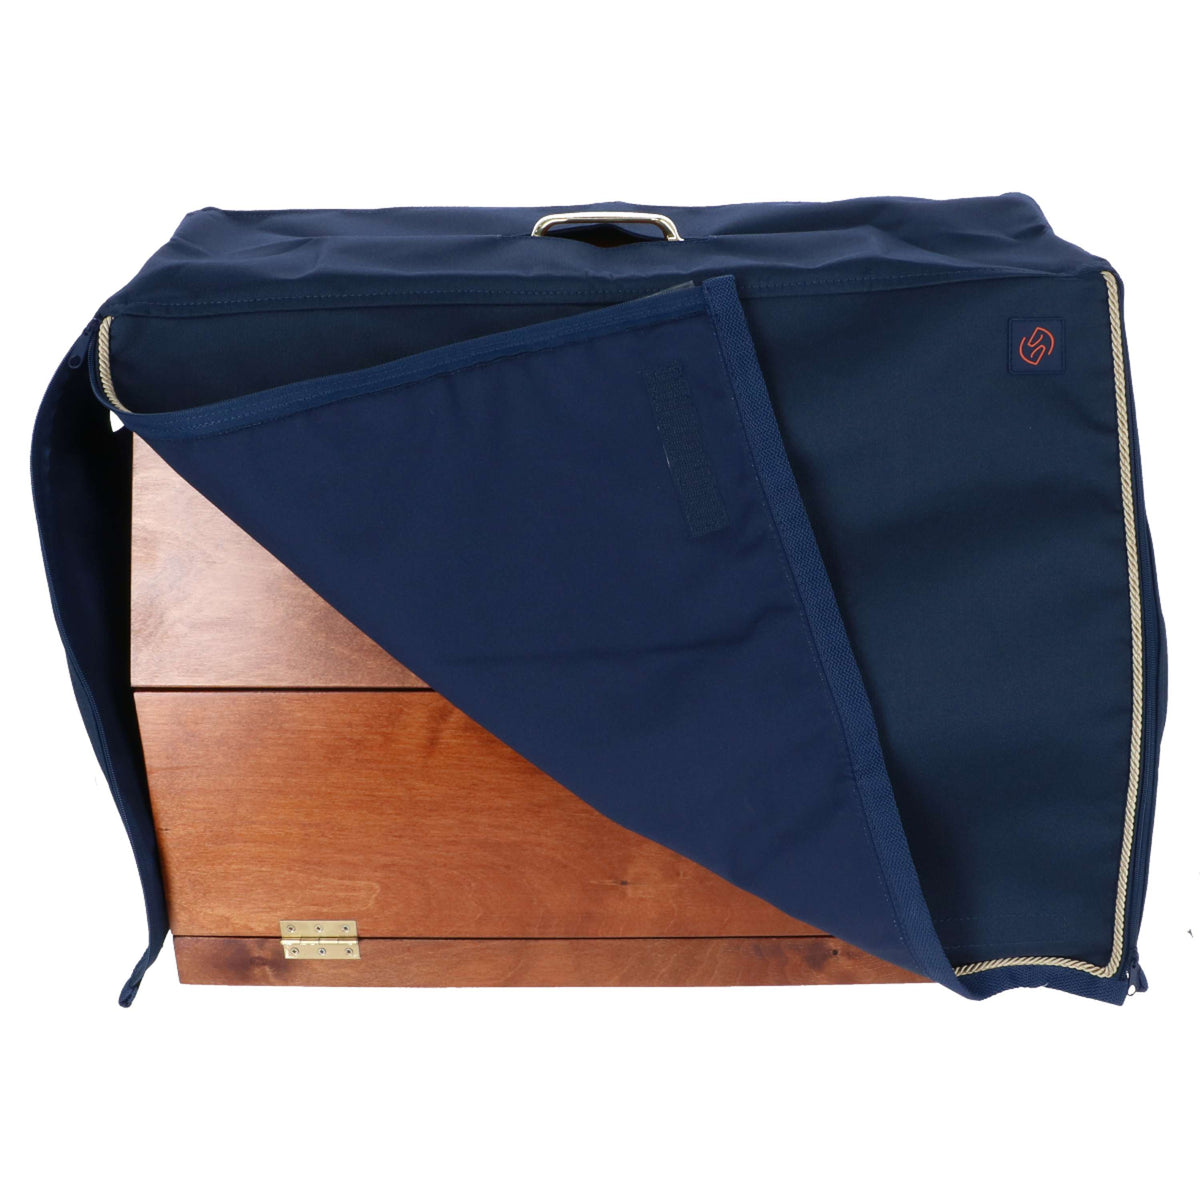 One Equestrian Grooming Box Cover Navy/Gold